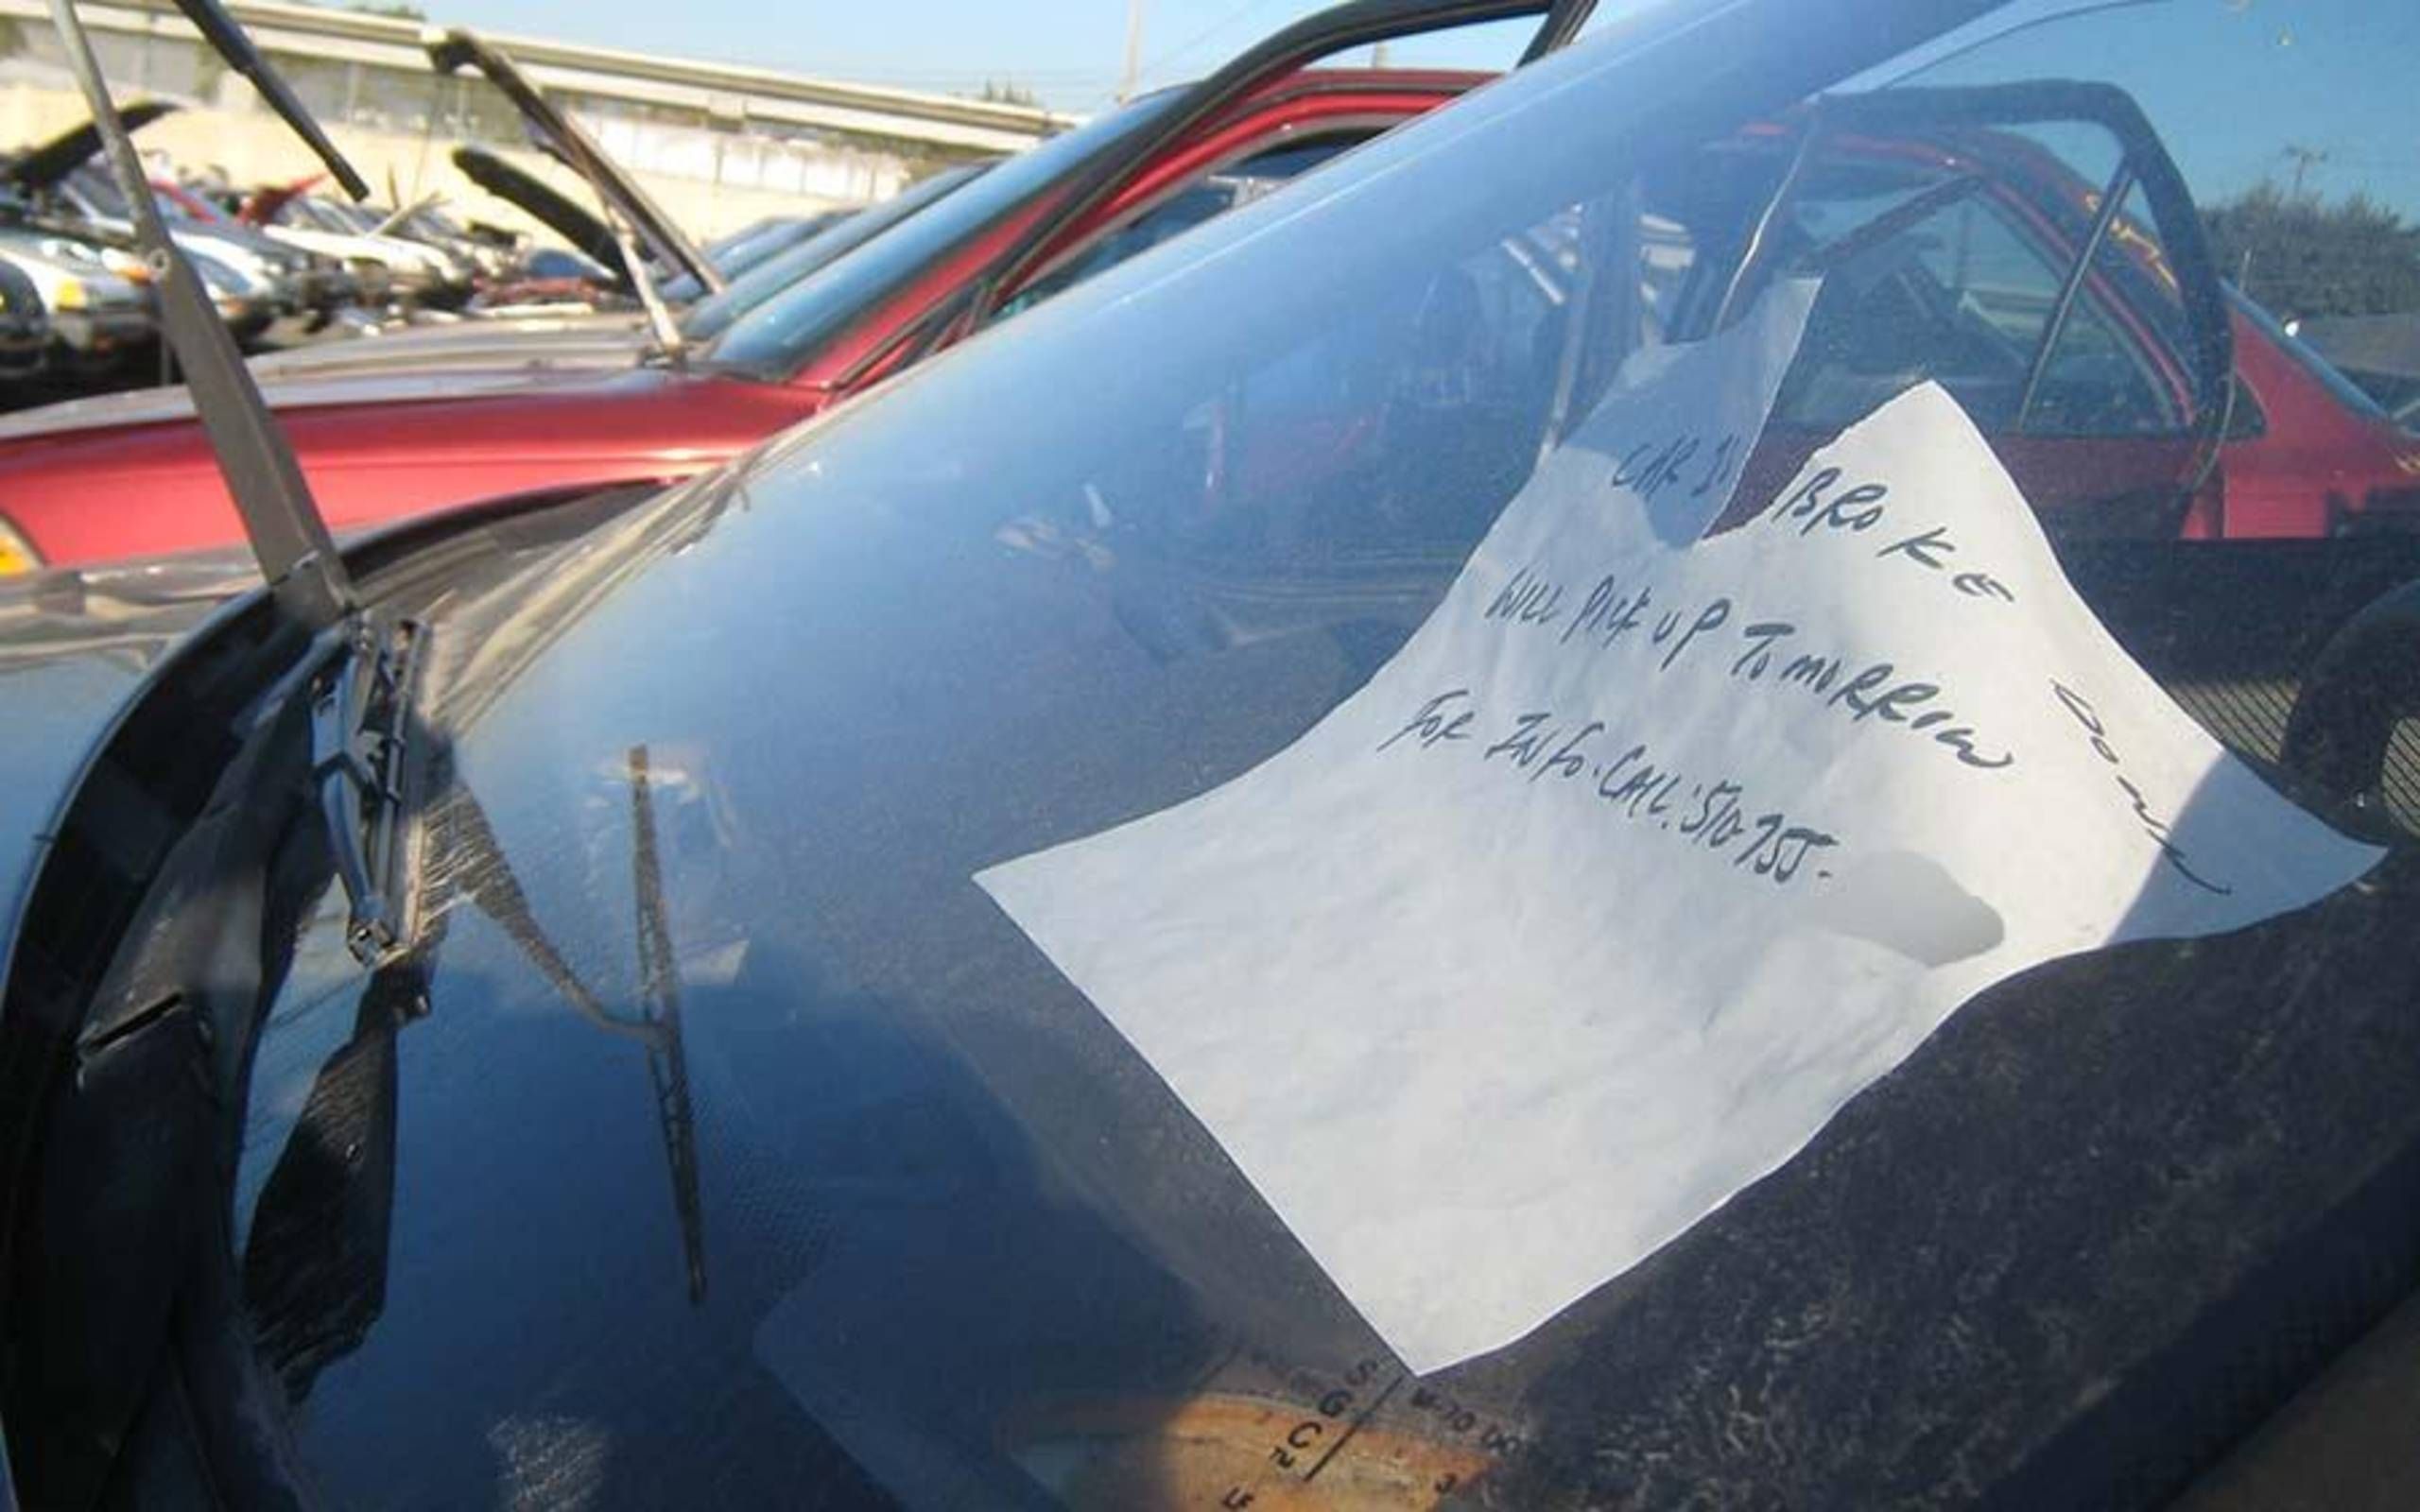 Will a note on your illegally parked car keep it from getting towed?